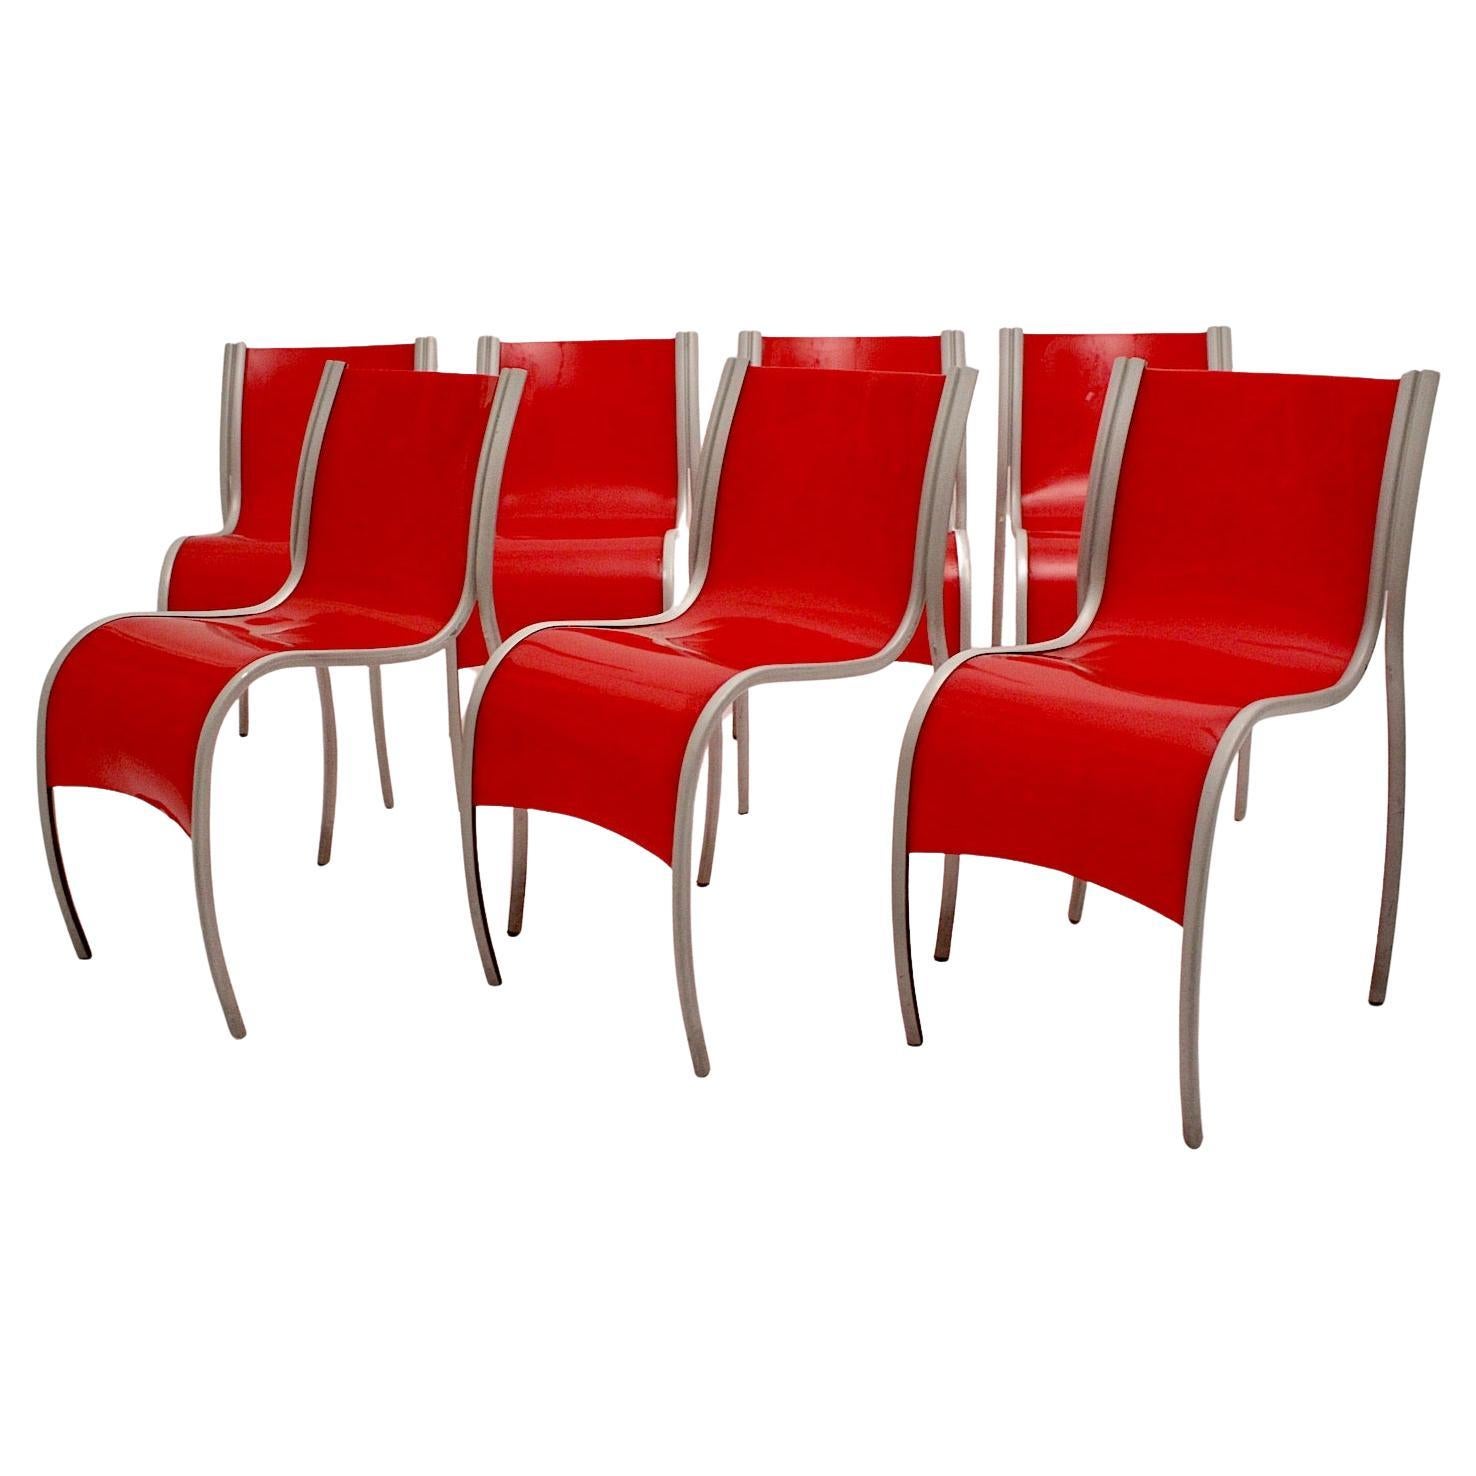 Modern Red Plastic Vintage Seven Dining Chairs Ron Arad for Kartell  1999 Italy